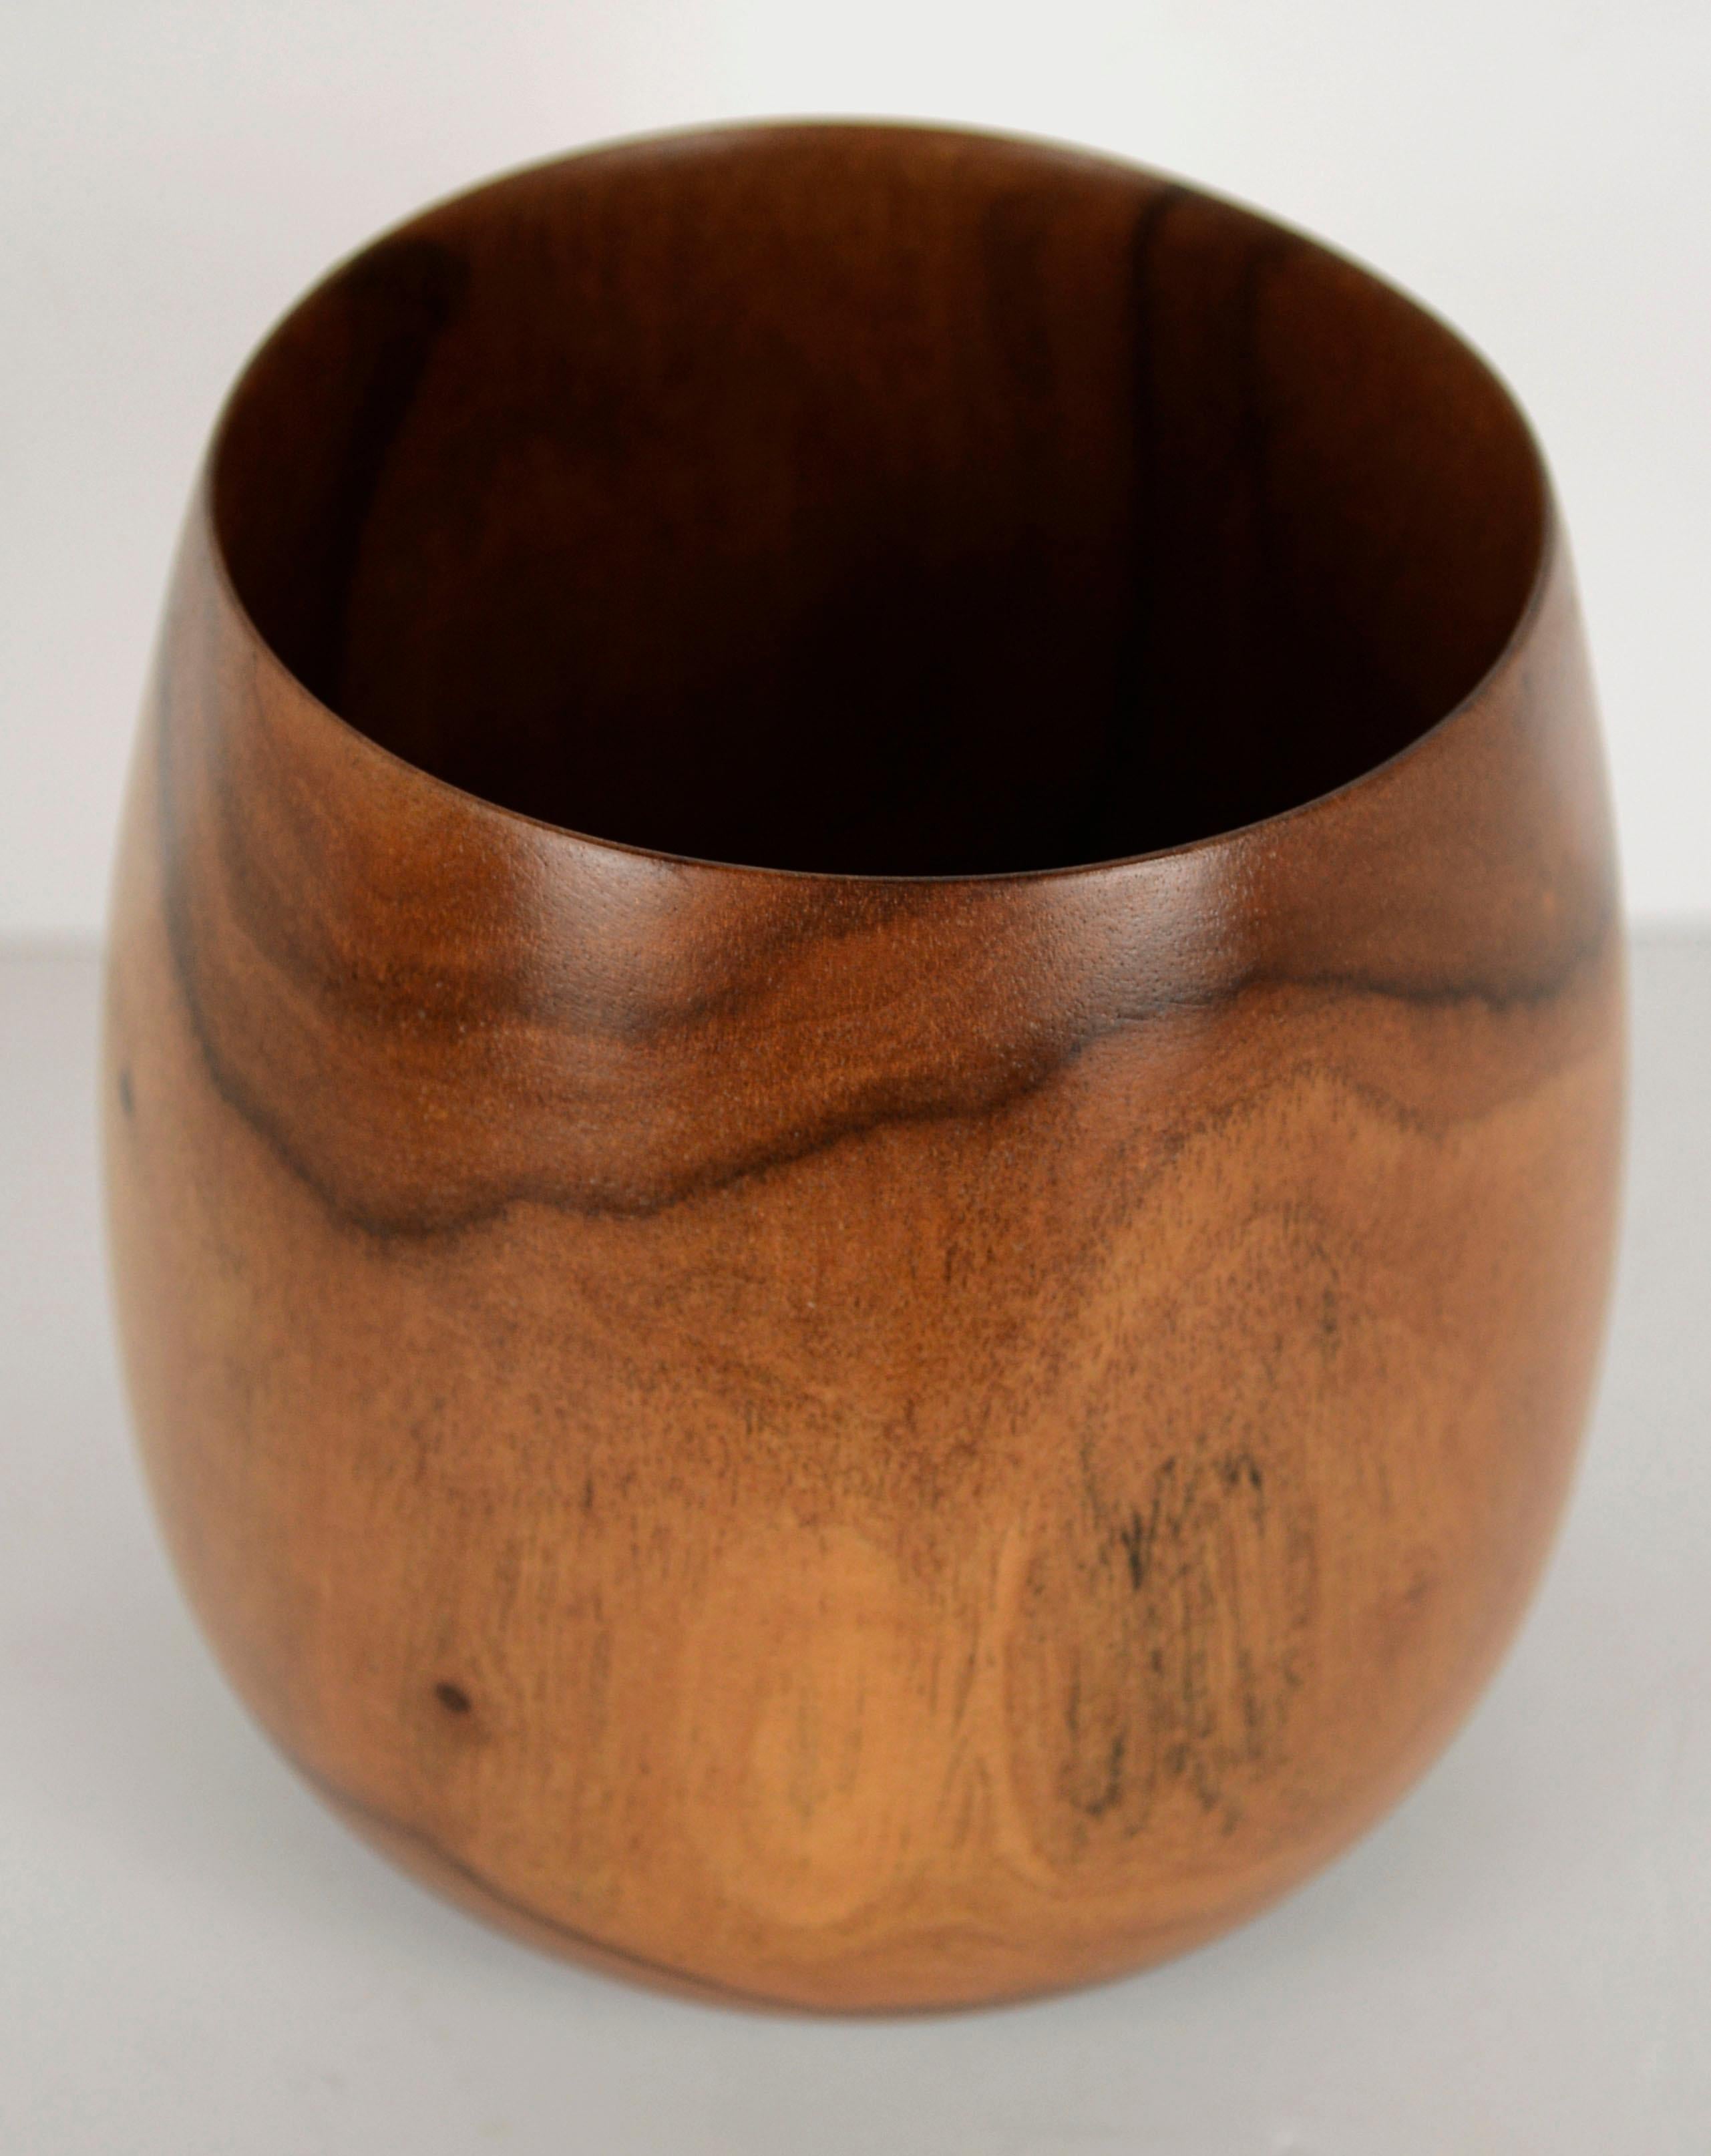 One-of-a-kind hand turned wood bowl, hand made from Hawaiian milo wood, by Big Island wood craftsman Joseph Mathieu (American, b.20th Century). Milo, also known as Pacific rosewood, has a gorgeous patterned woodgrain that is featured beautifully in